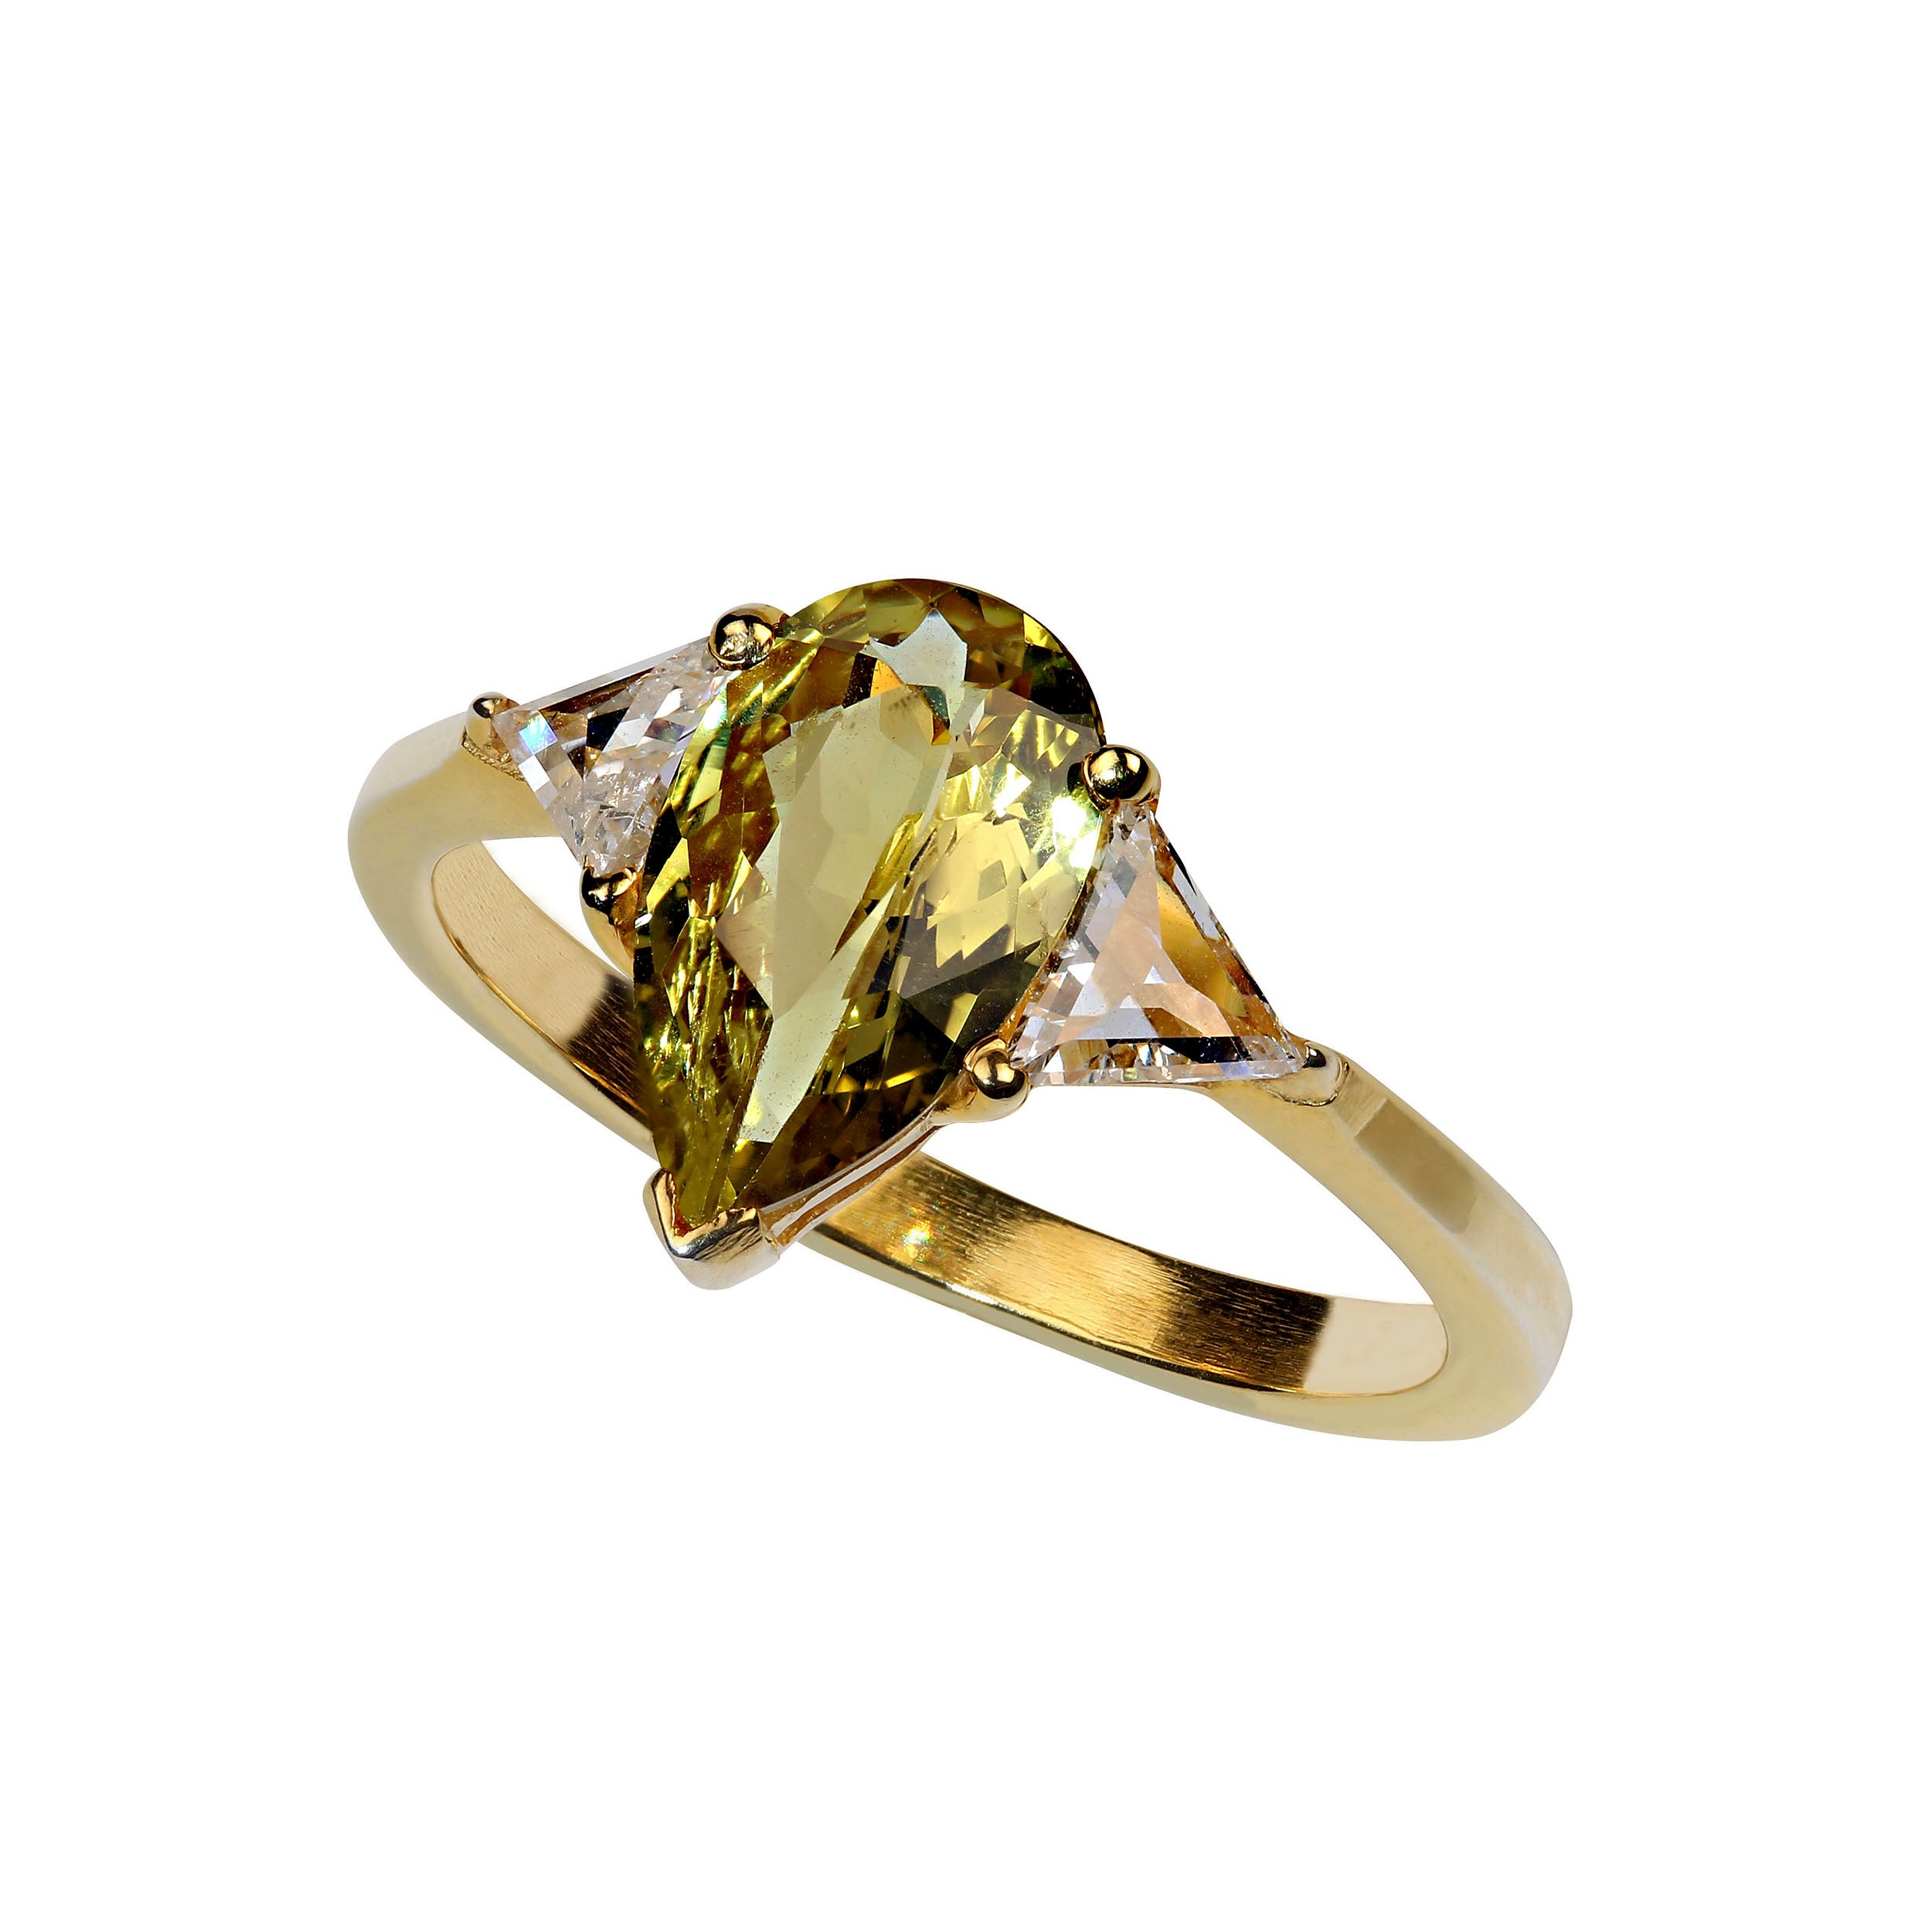 1.9Ct captivating Chrysoberyl in a lovely teardrop shape accented with two trianges of diamonds, total weight of 0.44cts. The lively yellowy gold Chrysoberyl comes from one of our favorite vendors in the mountains outside of Rio de Janeiro. These